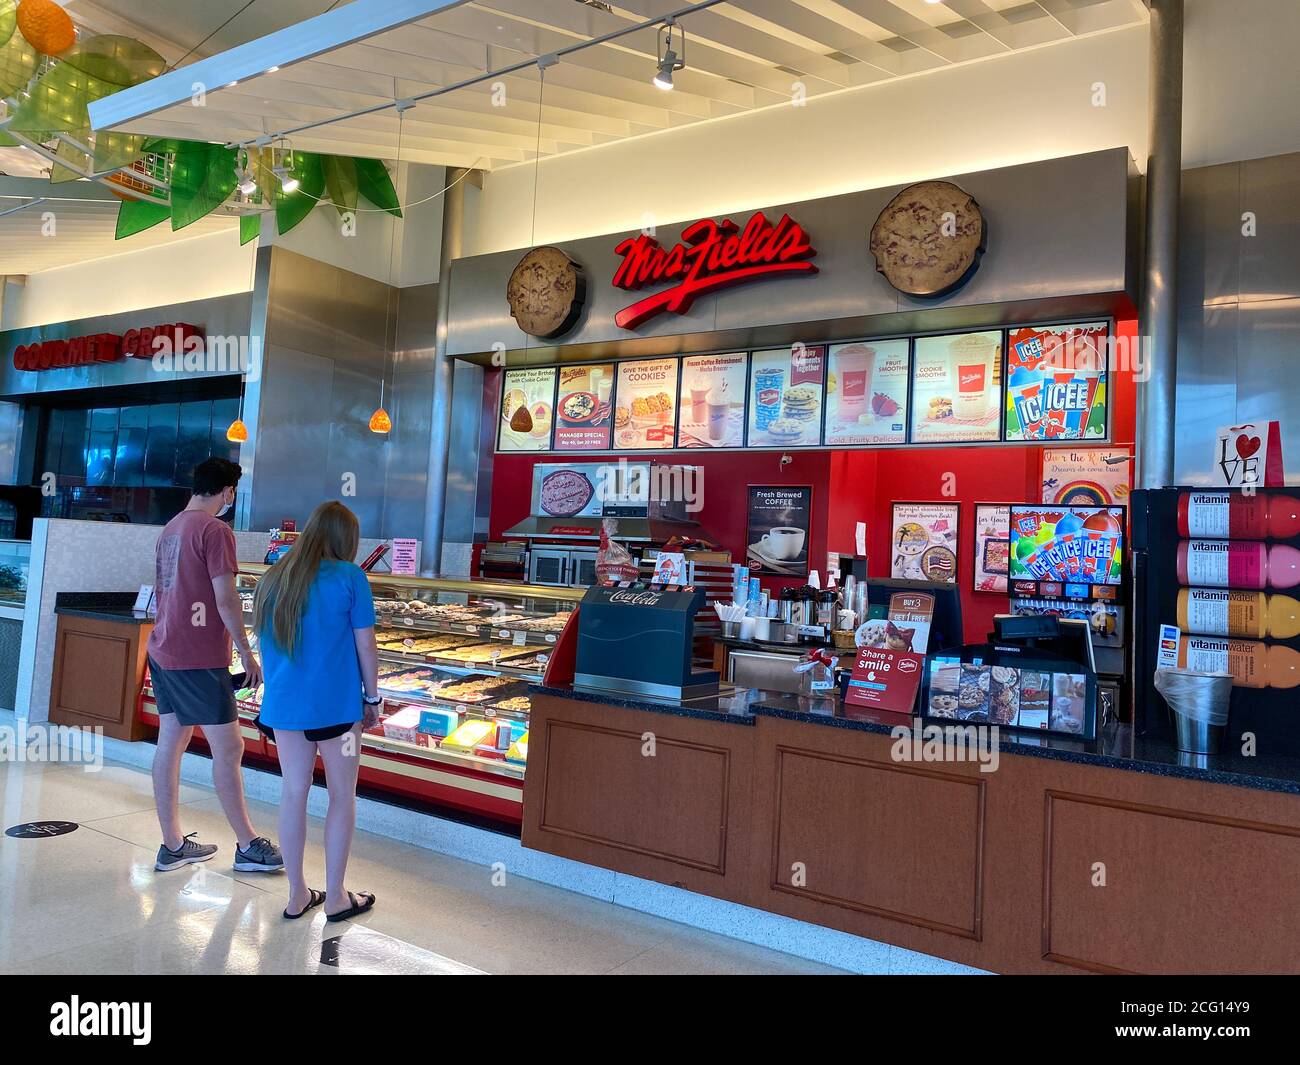 Orlando, FL/USA - 7/4/20:  People buying cookies at a Mrs. Fields Cookie retail store at an indoor mall in Orlando, Florida. Stock Photo